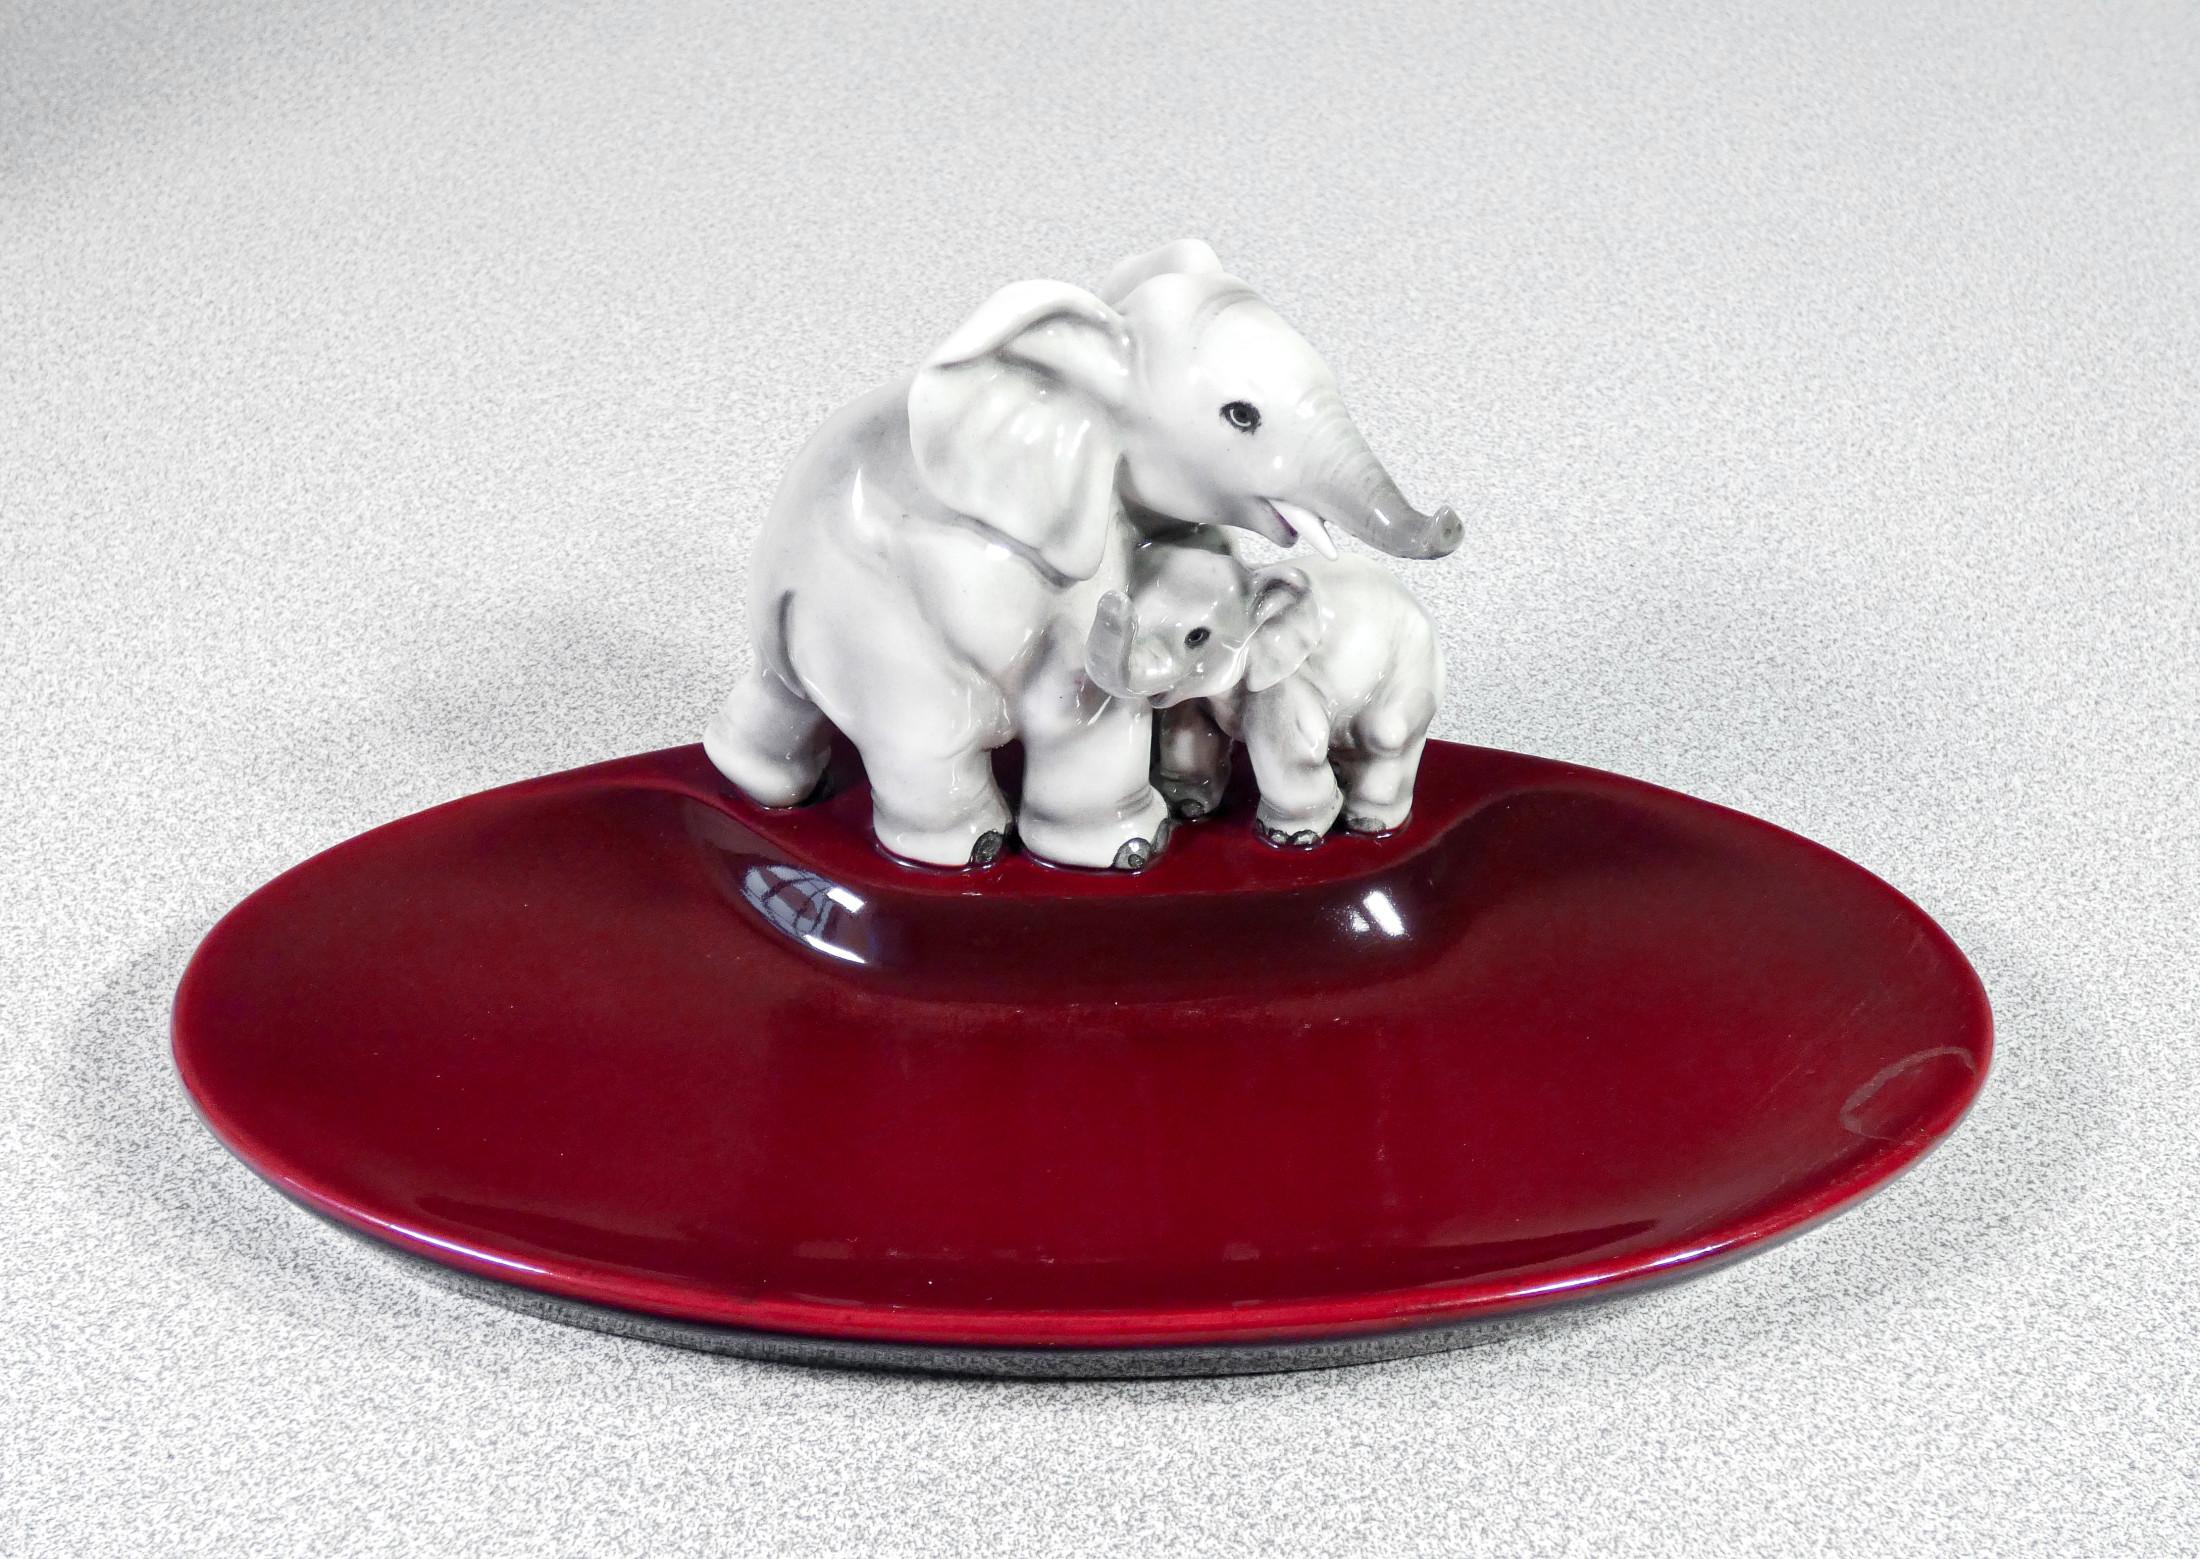 Ceramic sculpture
painted and enameled, signed
Guido Cacciapuoti.
Elephant with cub.

ORIGIN
Italy

PERIOD
1930s

AUTHOR
Guido CACCIAPUOTI
Born in Naples on 11 August 1892, he belongs to an ancient family of majolica makers from whom he